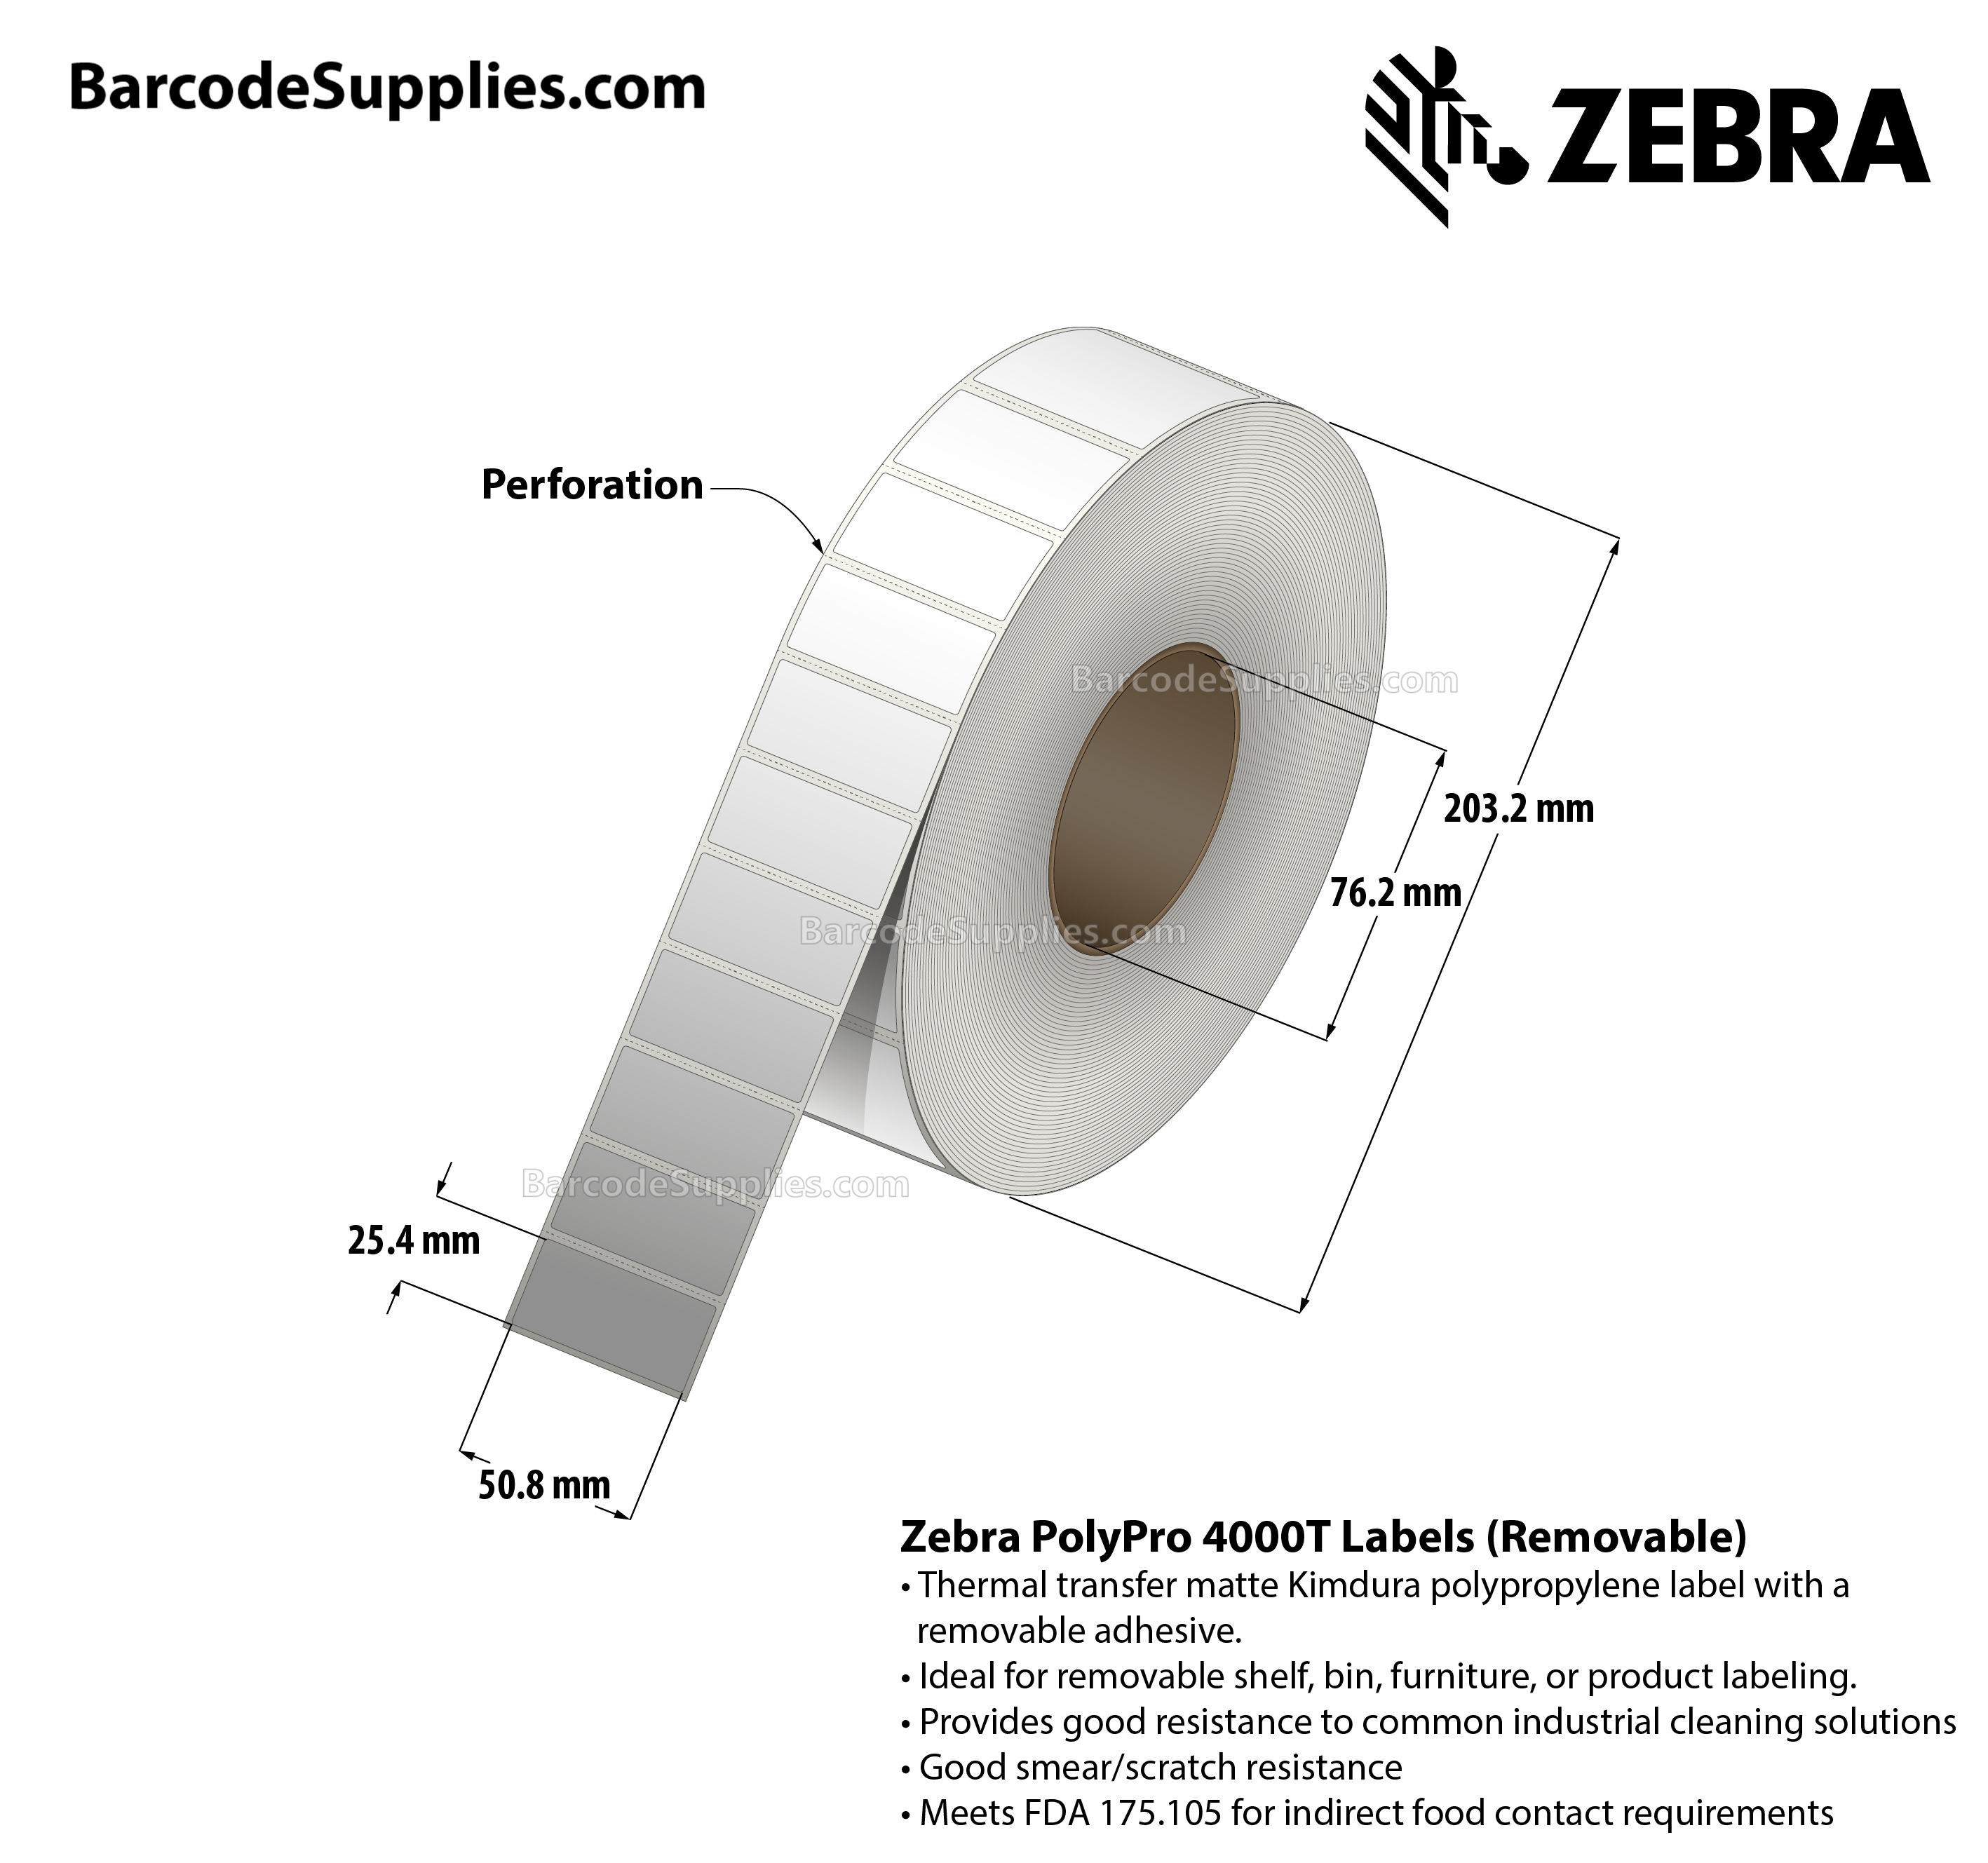 2 x 1 Thermal Transfer White PolyPro 4000T Removable Labels With Removable Adhesive - Perforated - 3000 Labels Per Roll - Carton Of 1 Rolls - 3000 Labels Total - MPN: 10022935